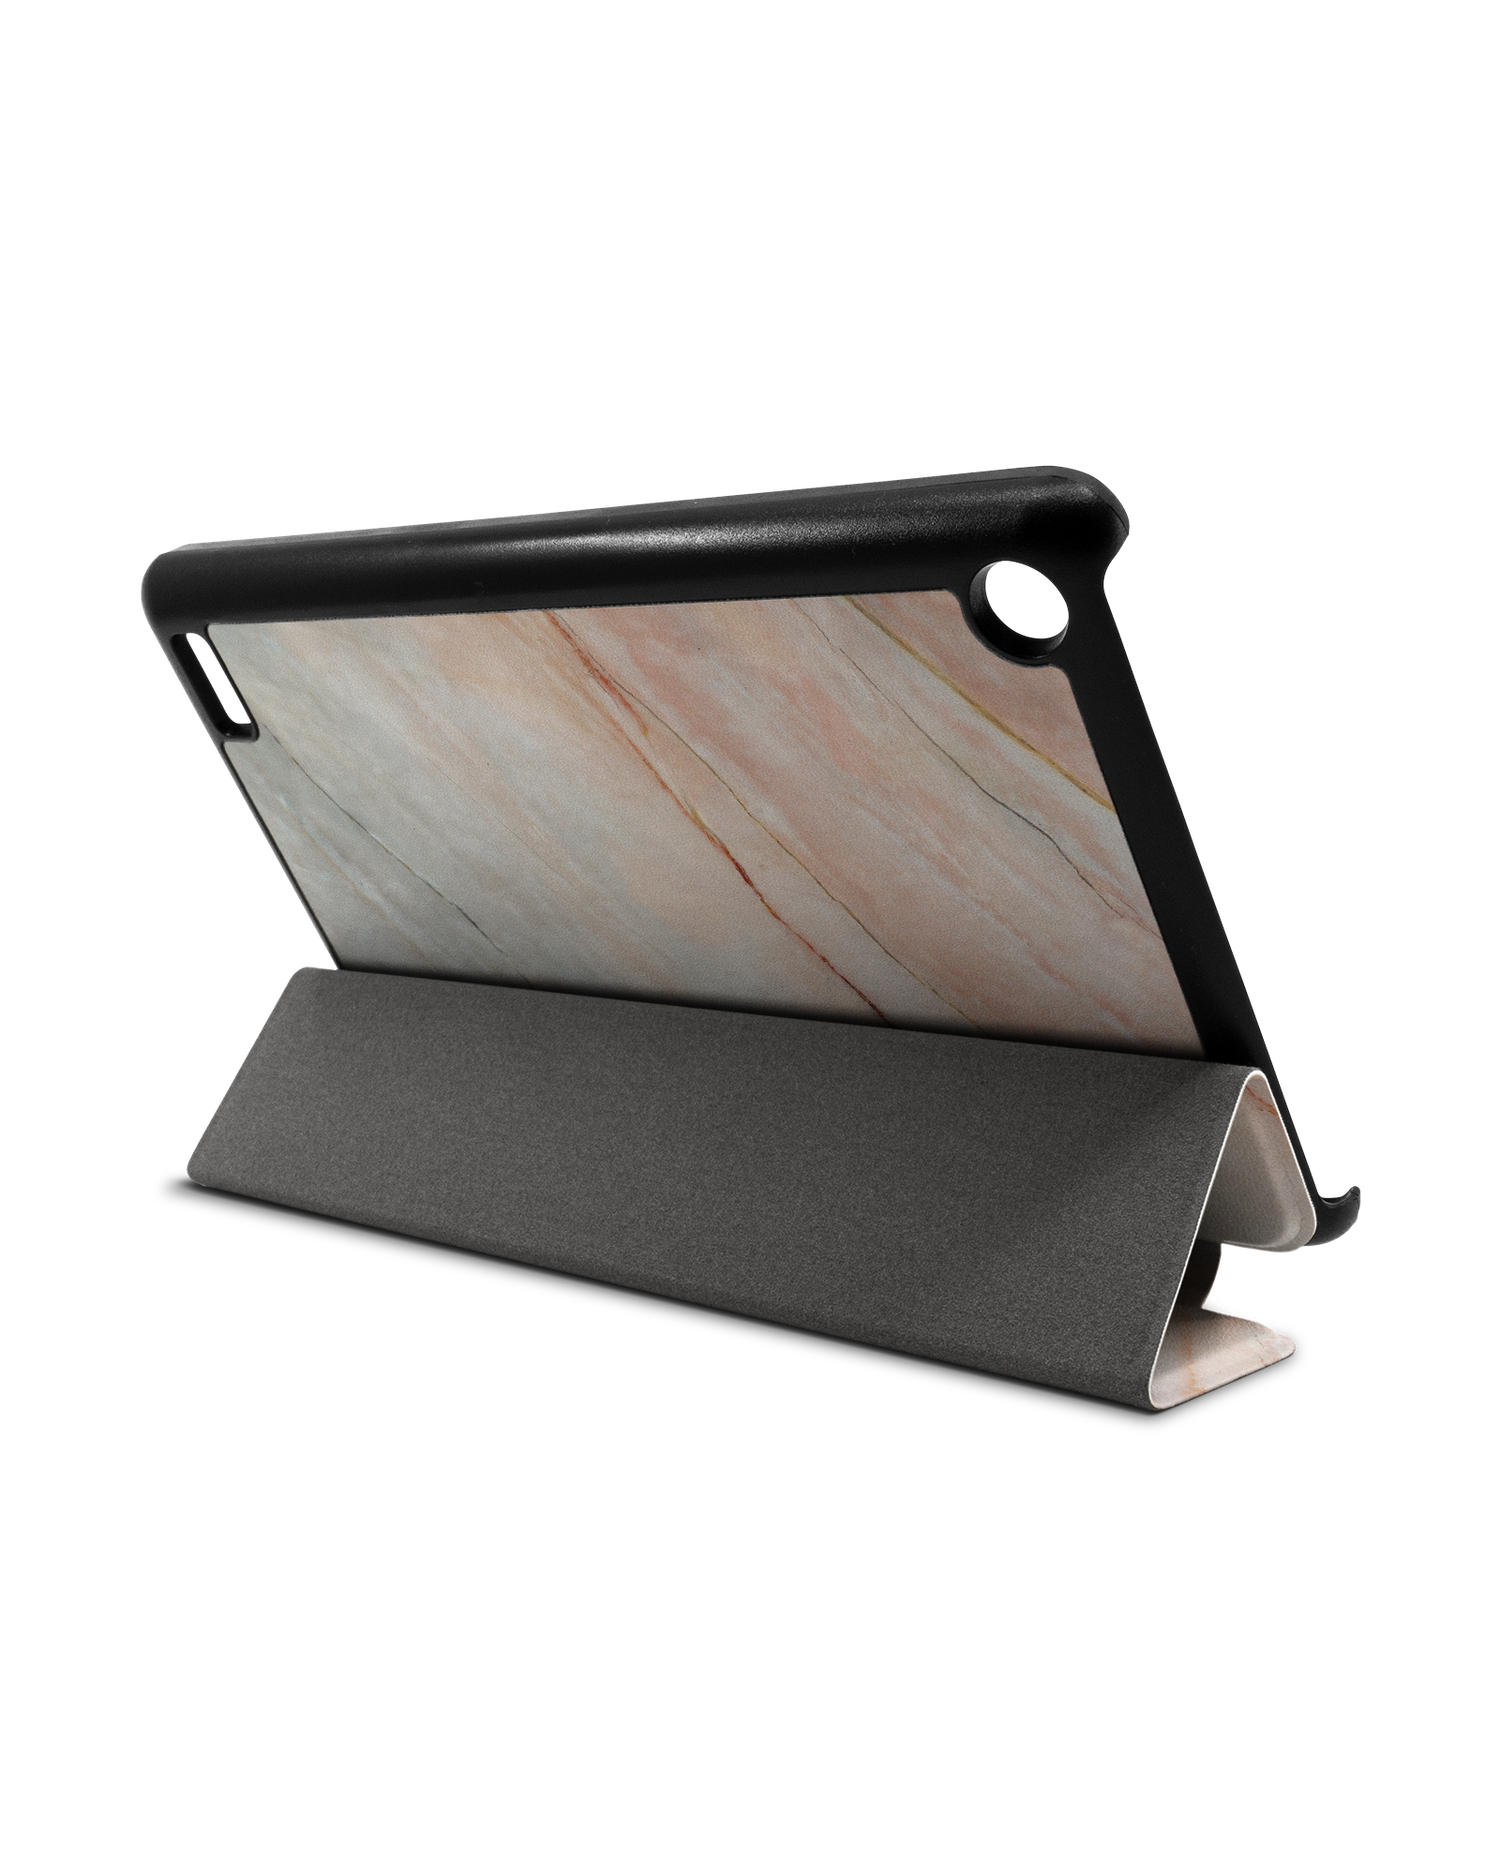 Mother of Pearl Marble Tablet Smart Case for Amazon Fire 7: Used as Stand